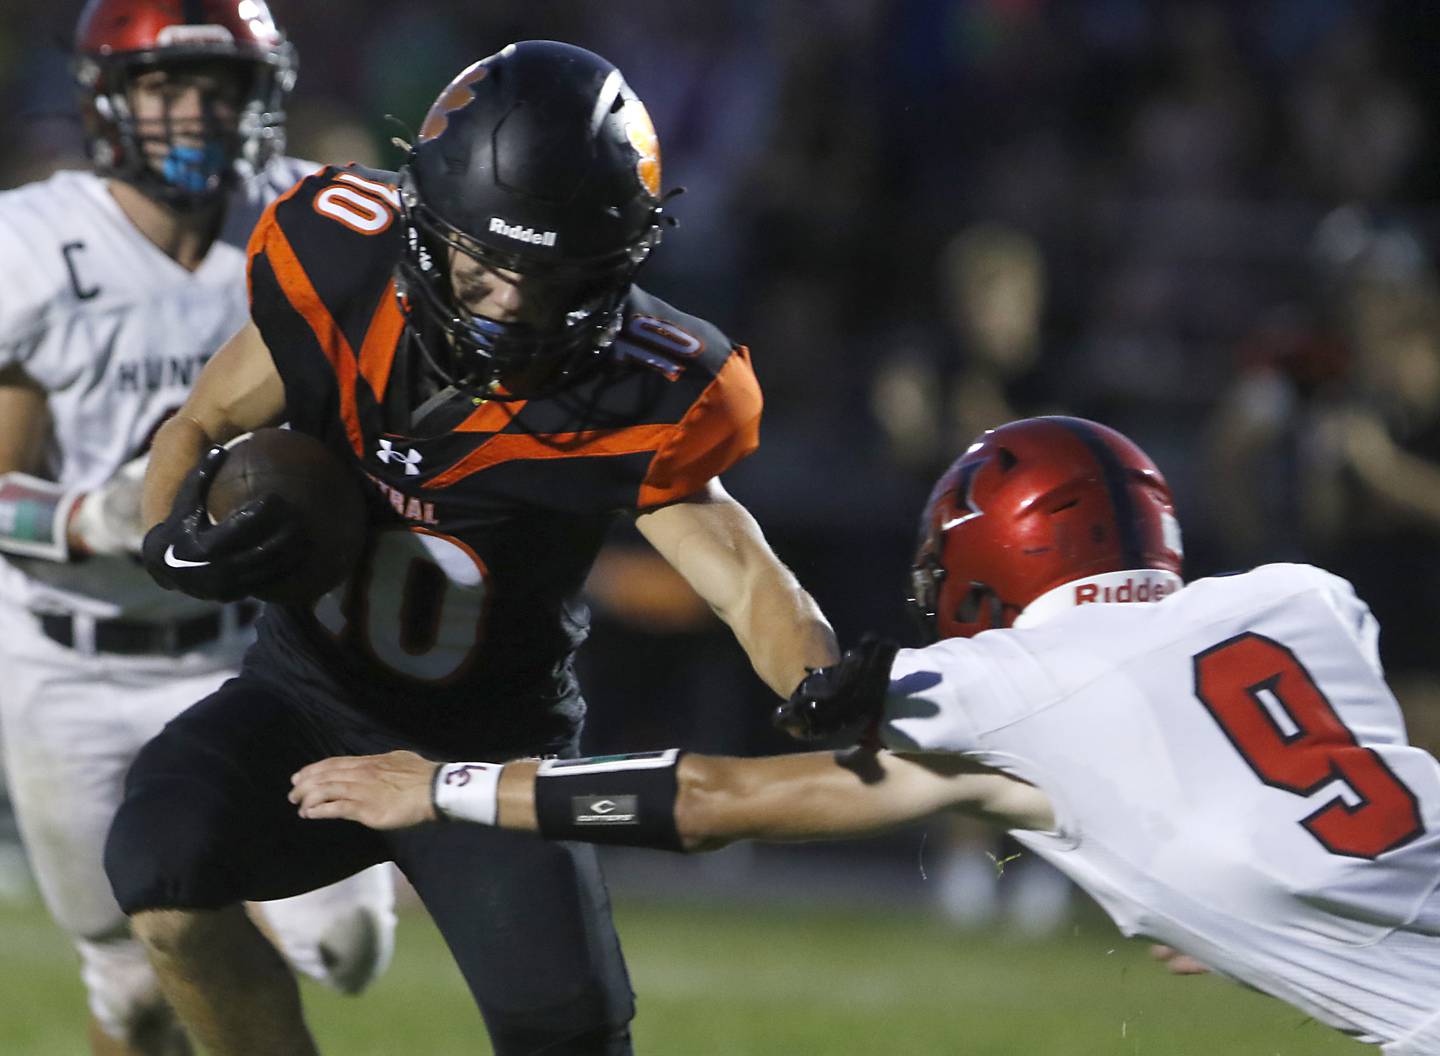 Crystal Lake Central's Griffin Buehler tries to avoid the tackle of Huntley's Liam Manning during a Fox Valley Conference football game Friday, Aug. 26, 2022, between Crystal Lake Central and Huntley at Crystal Lake Central High School.